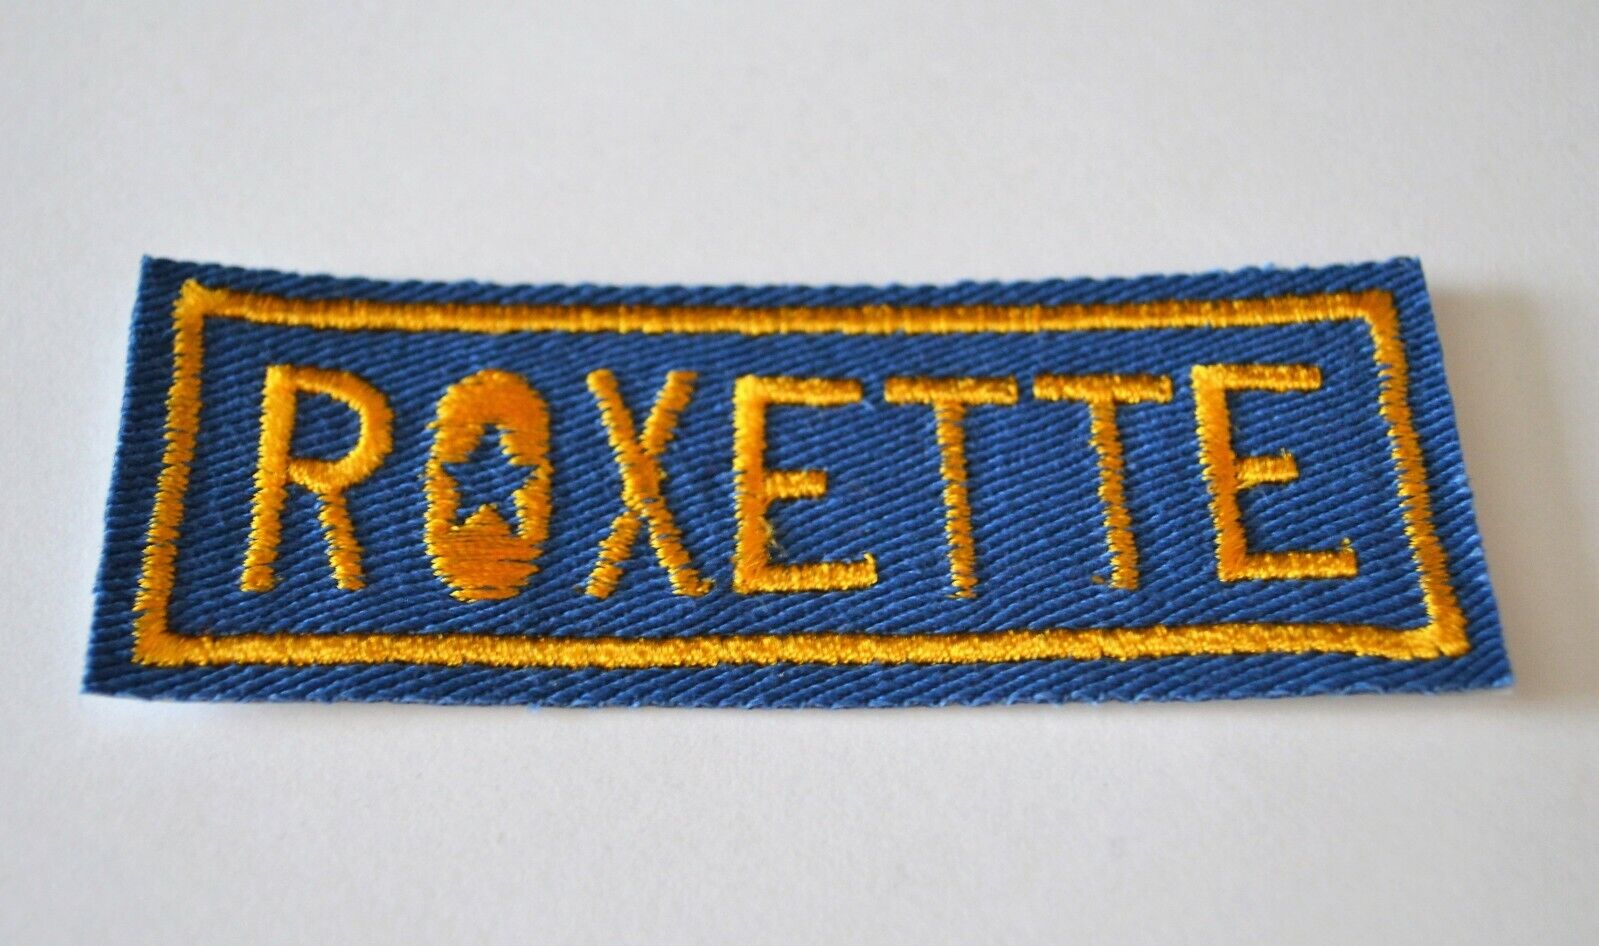 Roxette Vintage Embroidered Iron-On Punk Pop Rock Rare Patch Badge